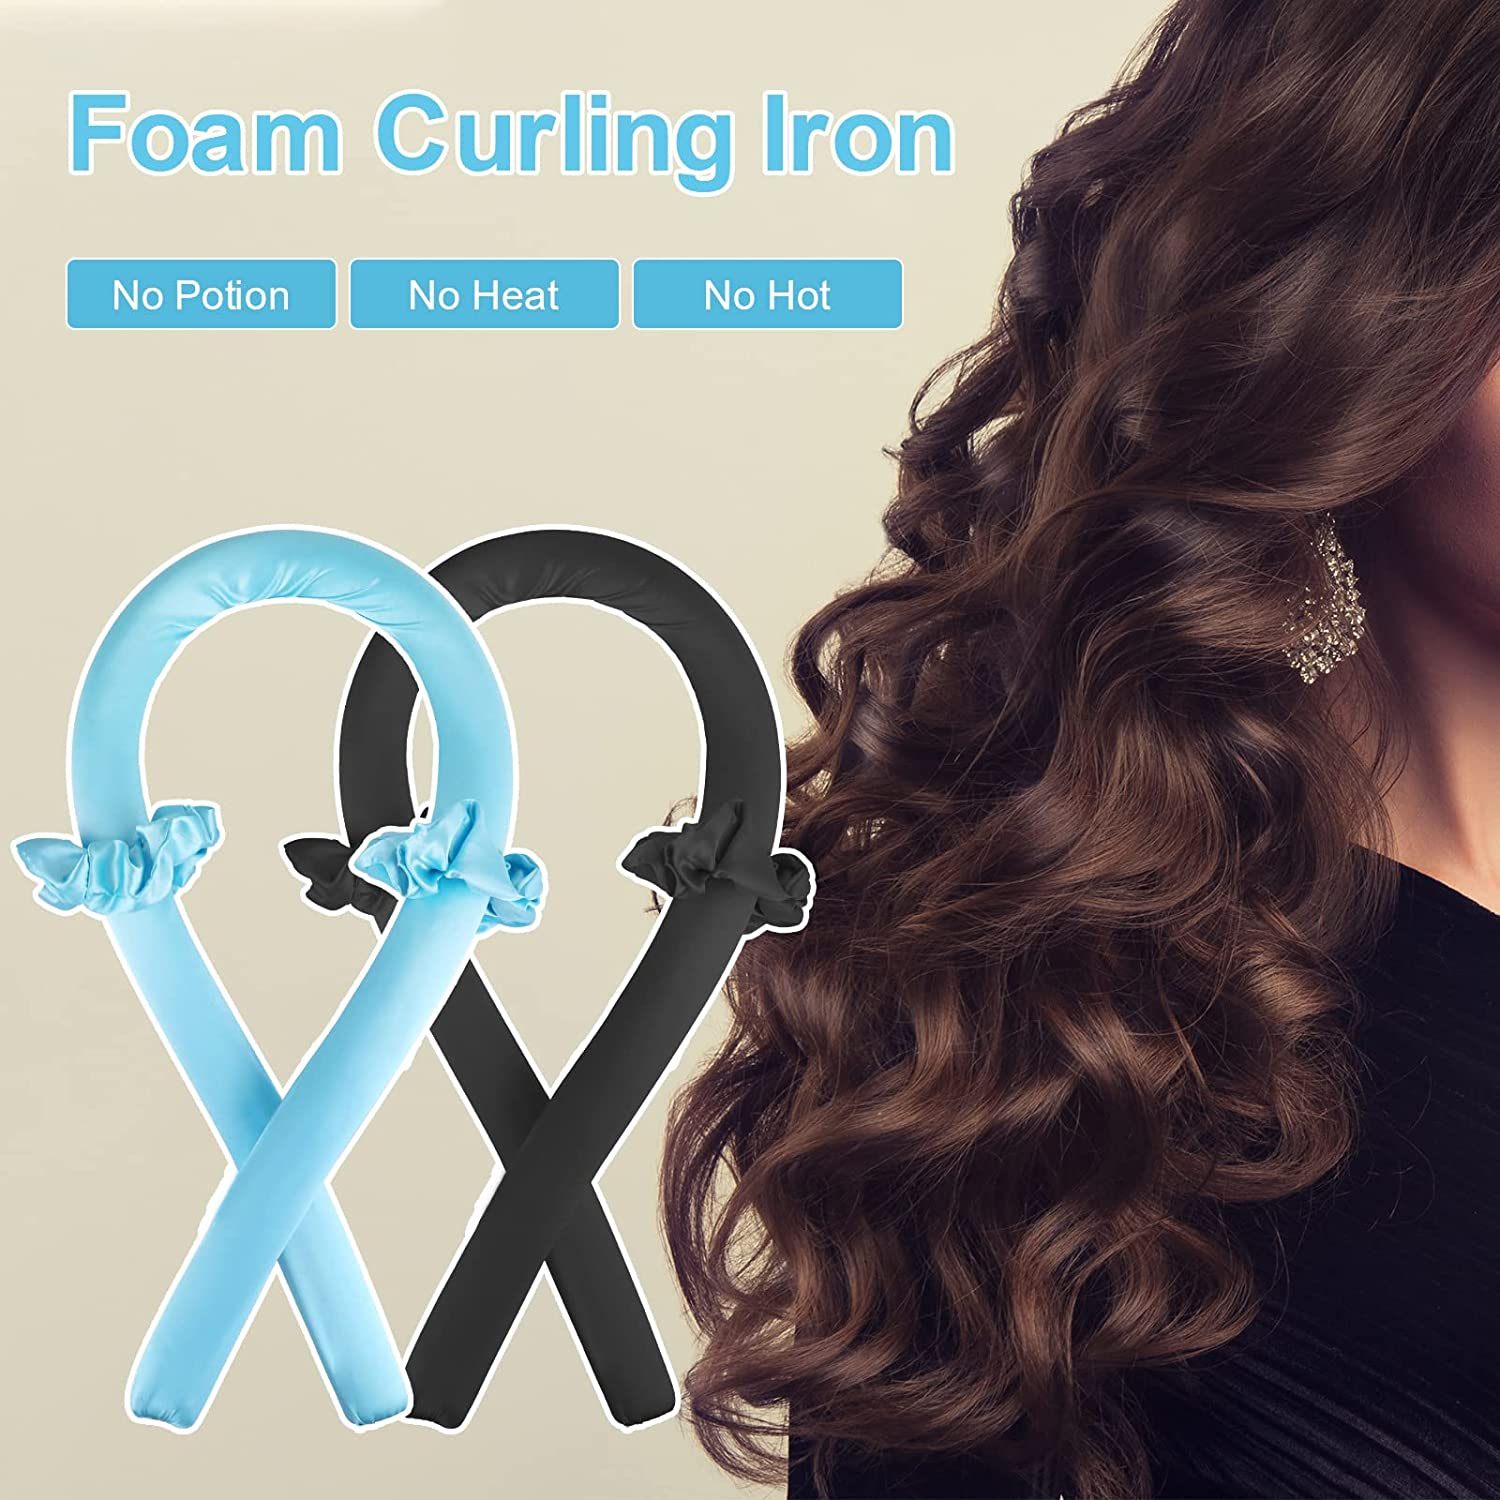 Heatless Curling Rod Headband, No Heat silk curlers hair rollers for long hair and you can sleep in soft foam hair curlers curling rods overnight, curling ribbon and flexible rods for natural hair